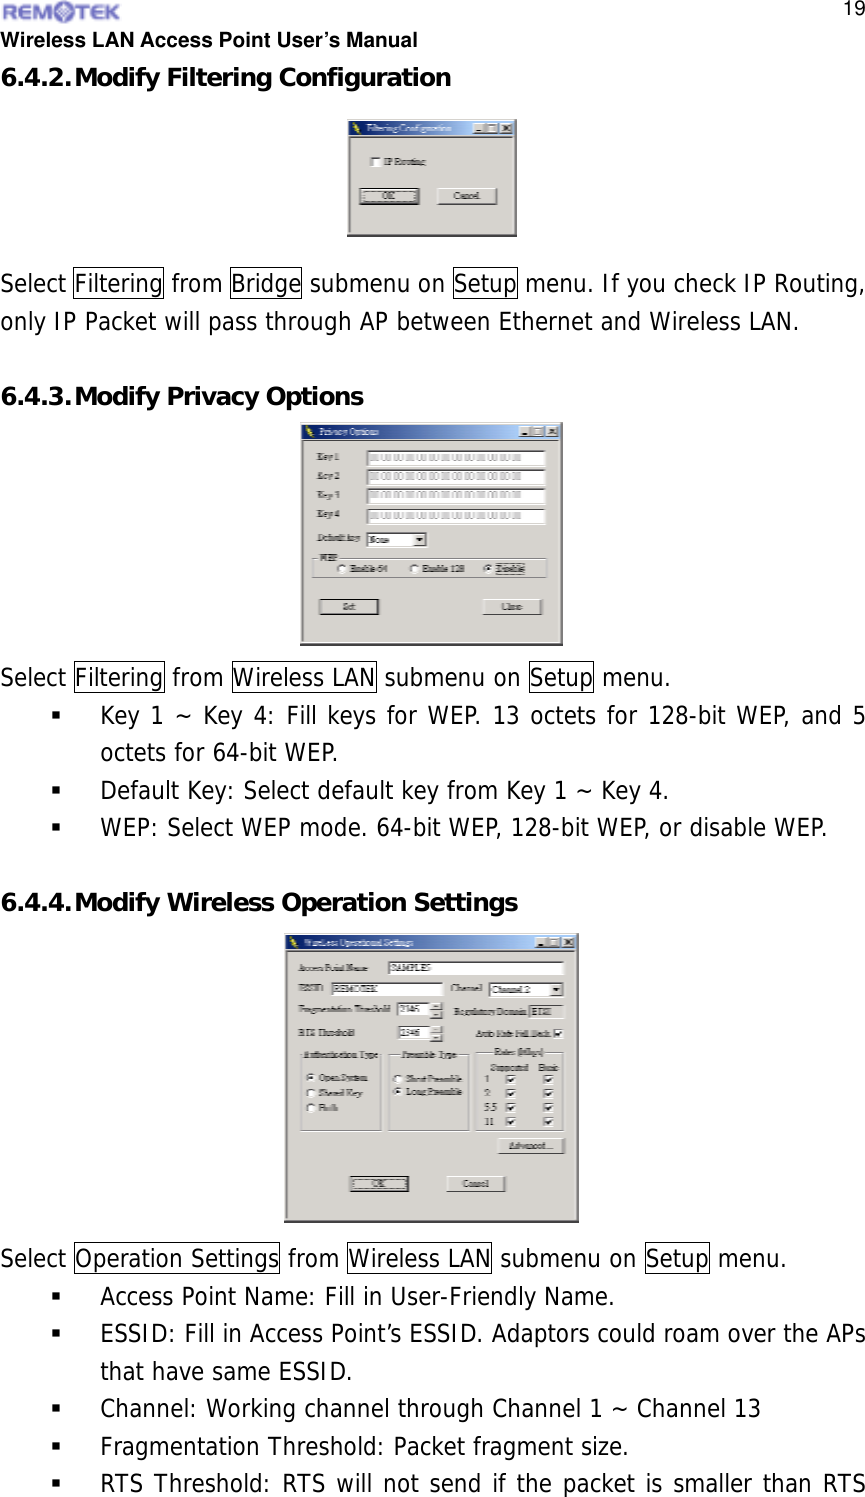  Wireless LAN Access Point User’s Manual  196.4.2. Modify Filtering Configuration Select Filtering from Bridge submenu on Setup menu. If you check IP Routing, only IP Packet will pass through AP between Ethernet and Wireless LAN.  6.4.3. Modify Privacy Options Select Filtering from Wireless LAN submenu on Setup menu.   Key 1 ~ Key 4: Fill keys for WEP. 13 octets for 128-bit WEP, and 5 octets for 64-bit WEP.   Default Key: Select default key from Key 1 ~ Key 4.   WEP: Select WEP mode. 64-bit WEP, 128-bit WEP, or disable WEP.  6.4.4. Modify Wireless Operation Settings Select Operation Settings from Wireless LAN submenu on Setup menu.   Access Point Name: Fill in User-Friendly Name.   ESSID: Fill in Access Point’s ESSID. Adaptors could roam over the APs that have same ESSID.   Channel: Working channel through Channel 1 ~ Channel 13   Fragmentation Threshold: Packet fragment size.   RTS Threshold: RTS will not send if the packet is smaller than RTS   